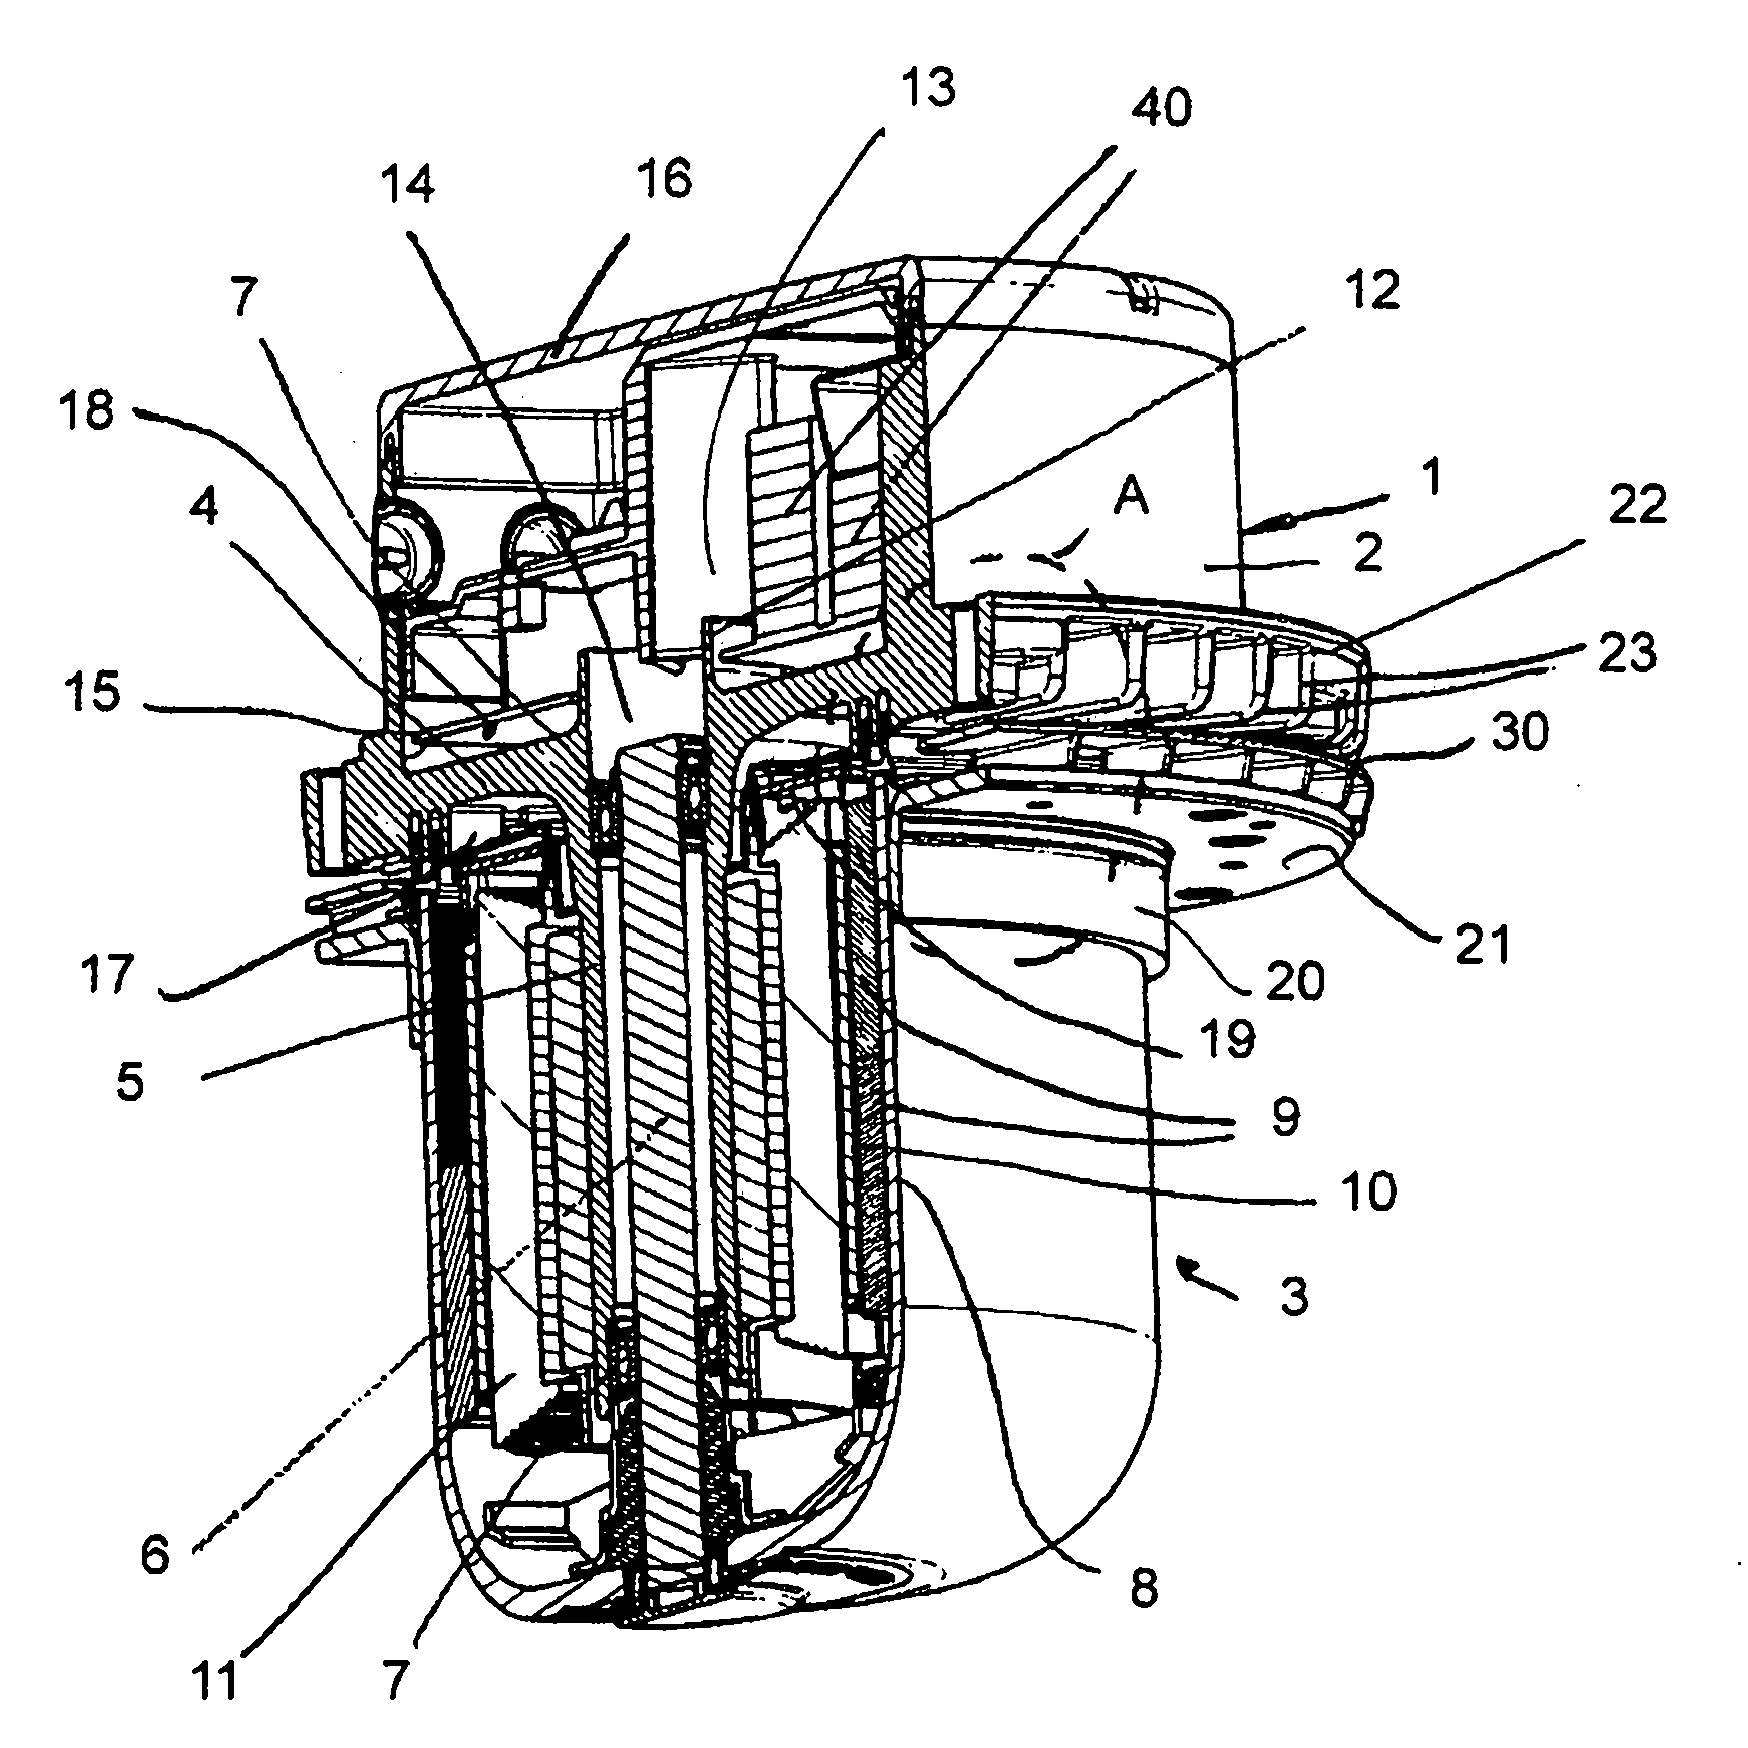 Electric motor, particularly outer rotor motor